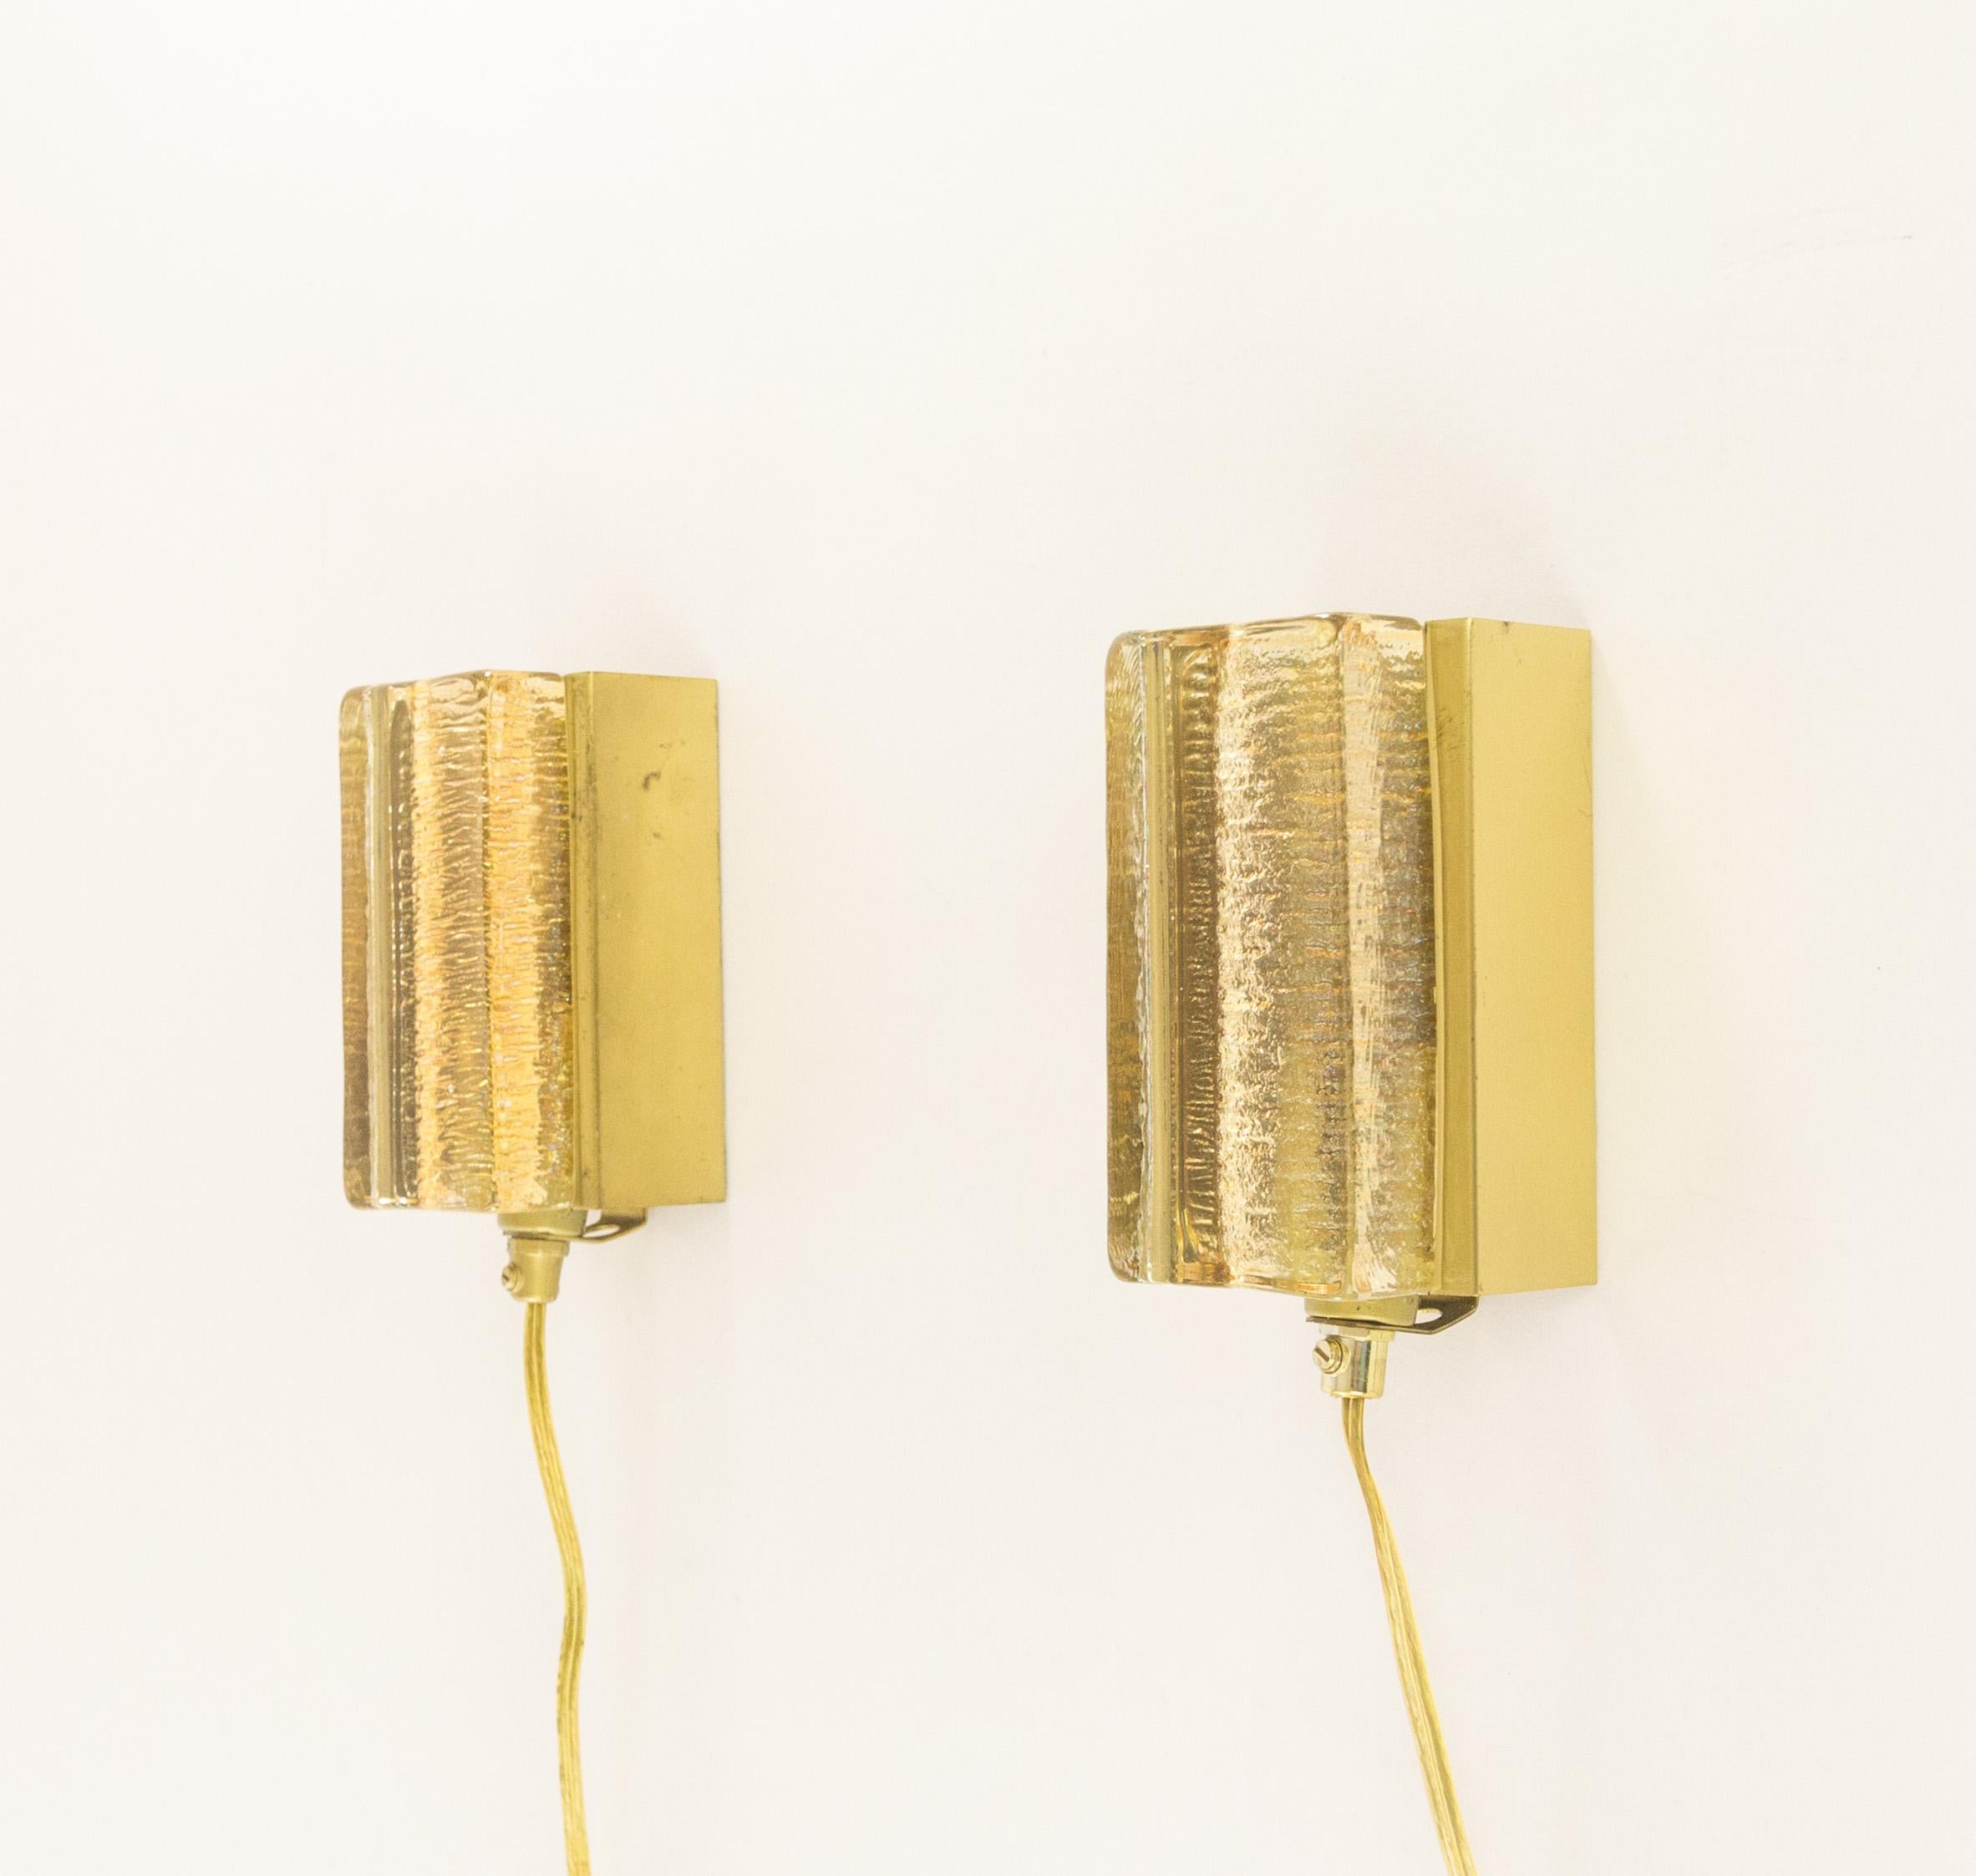 A set of two gold glass and brass Atlantic wall lamps that are produced by Danish lighting manufacturer Vitrika in the 1970s. Both lamps consist of two parts: a solid handmade glass body in gold, and the brass holder.

The condition of the brass